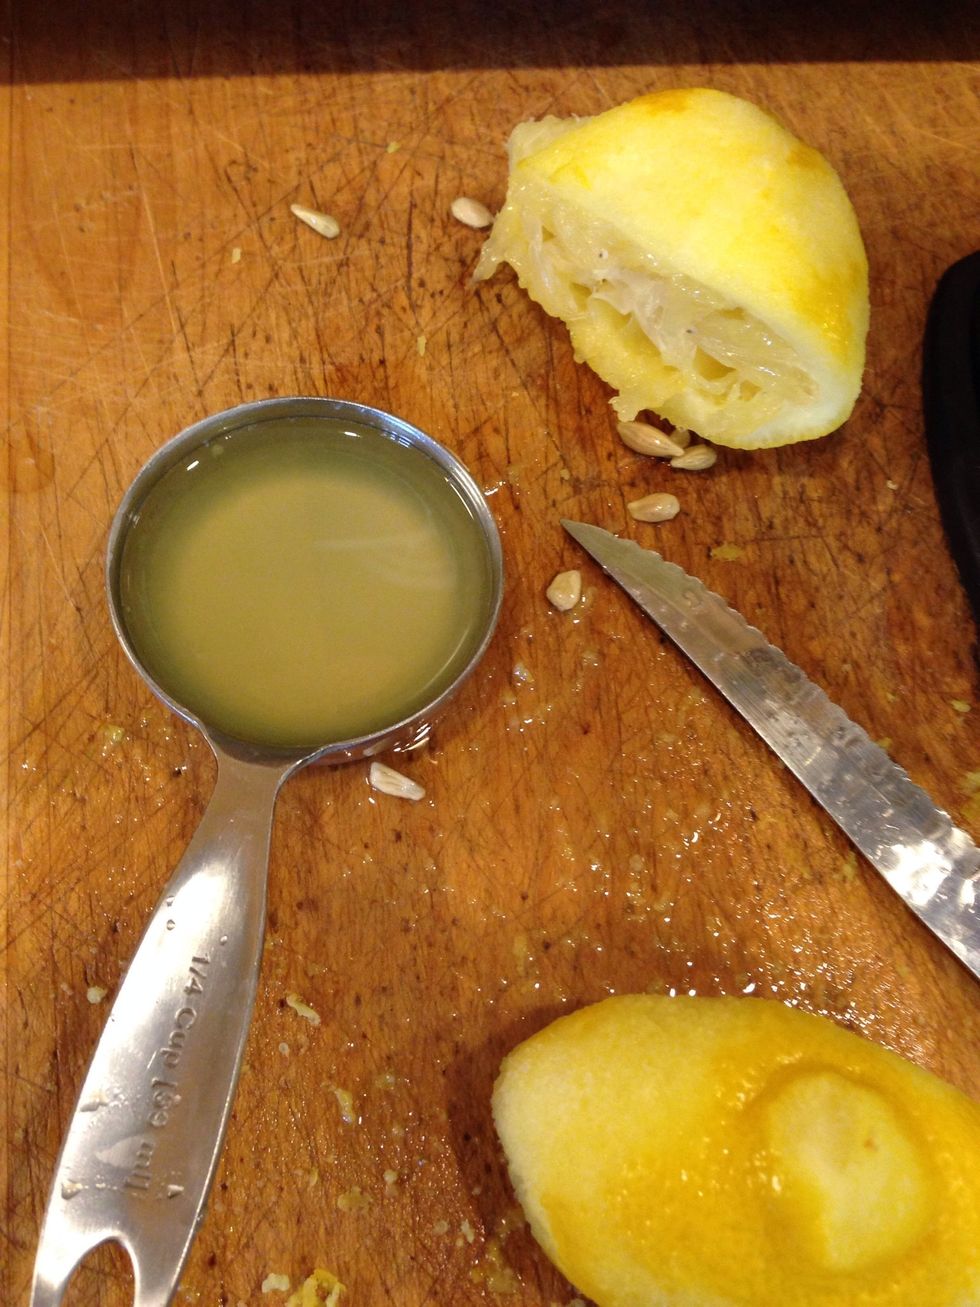 Squeeze out 1/4 cup of lemon juice.